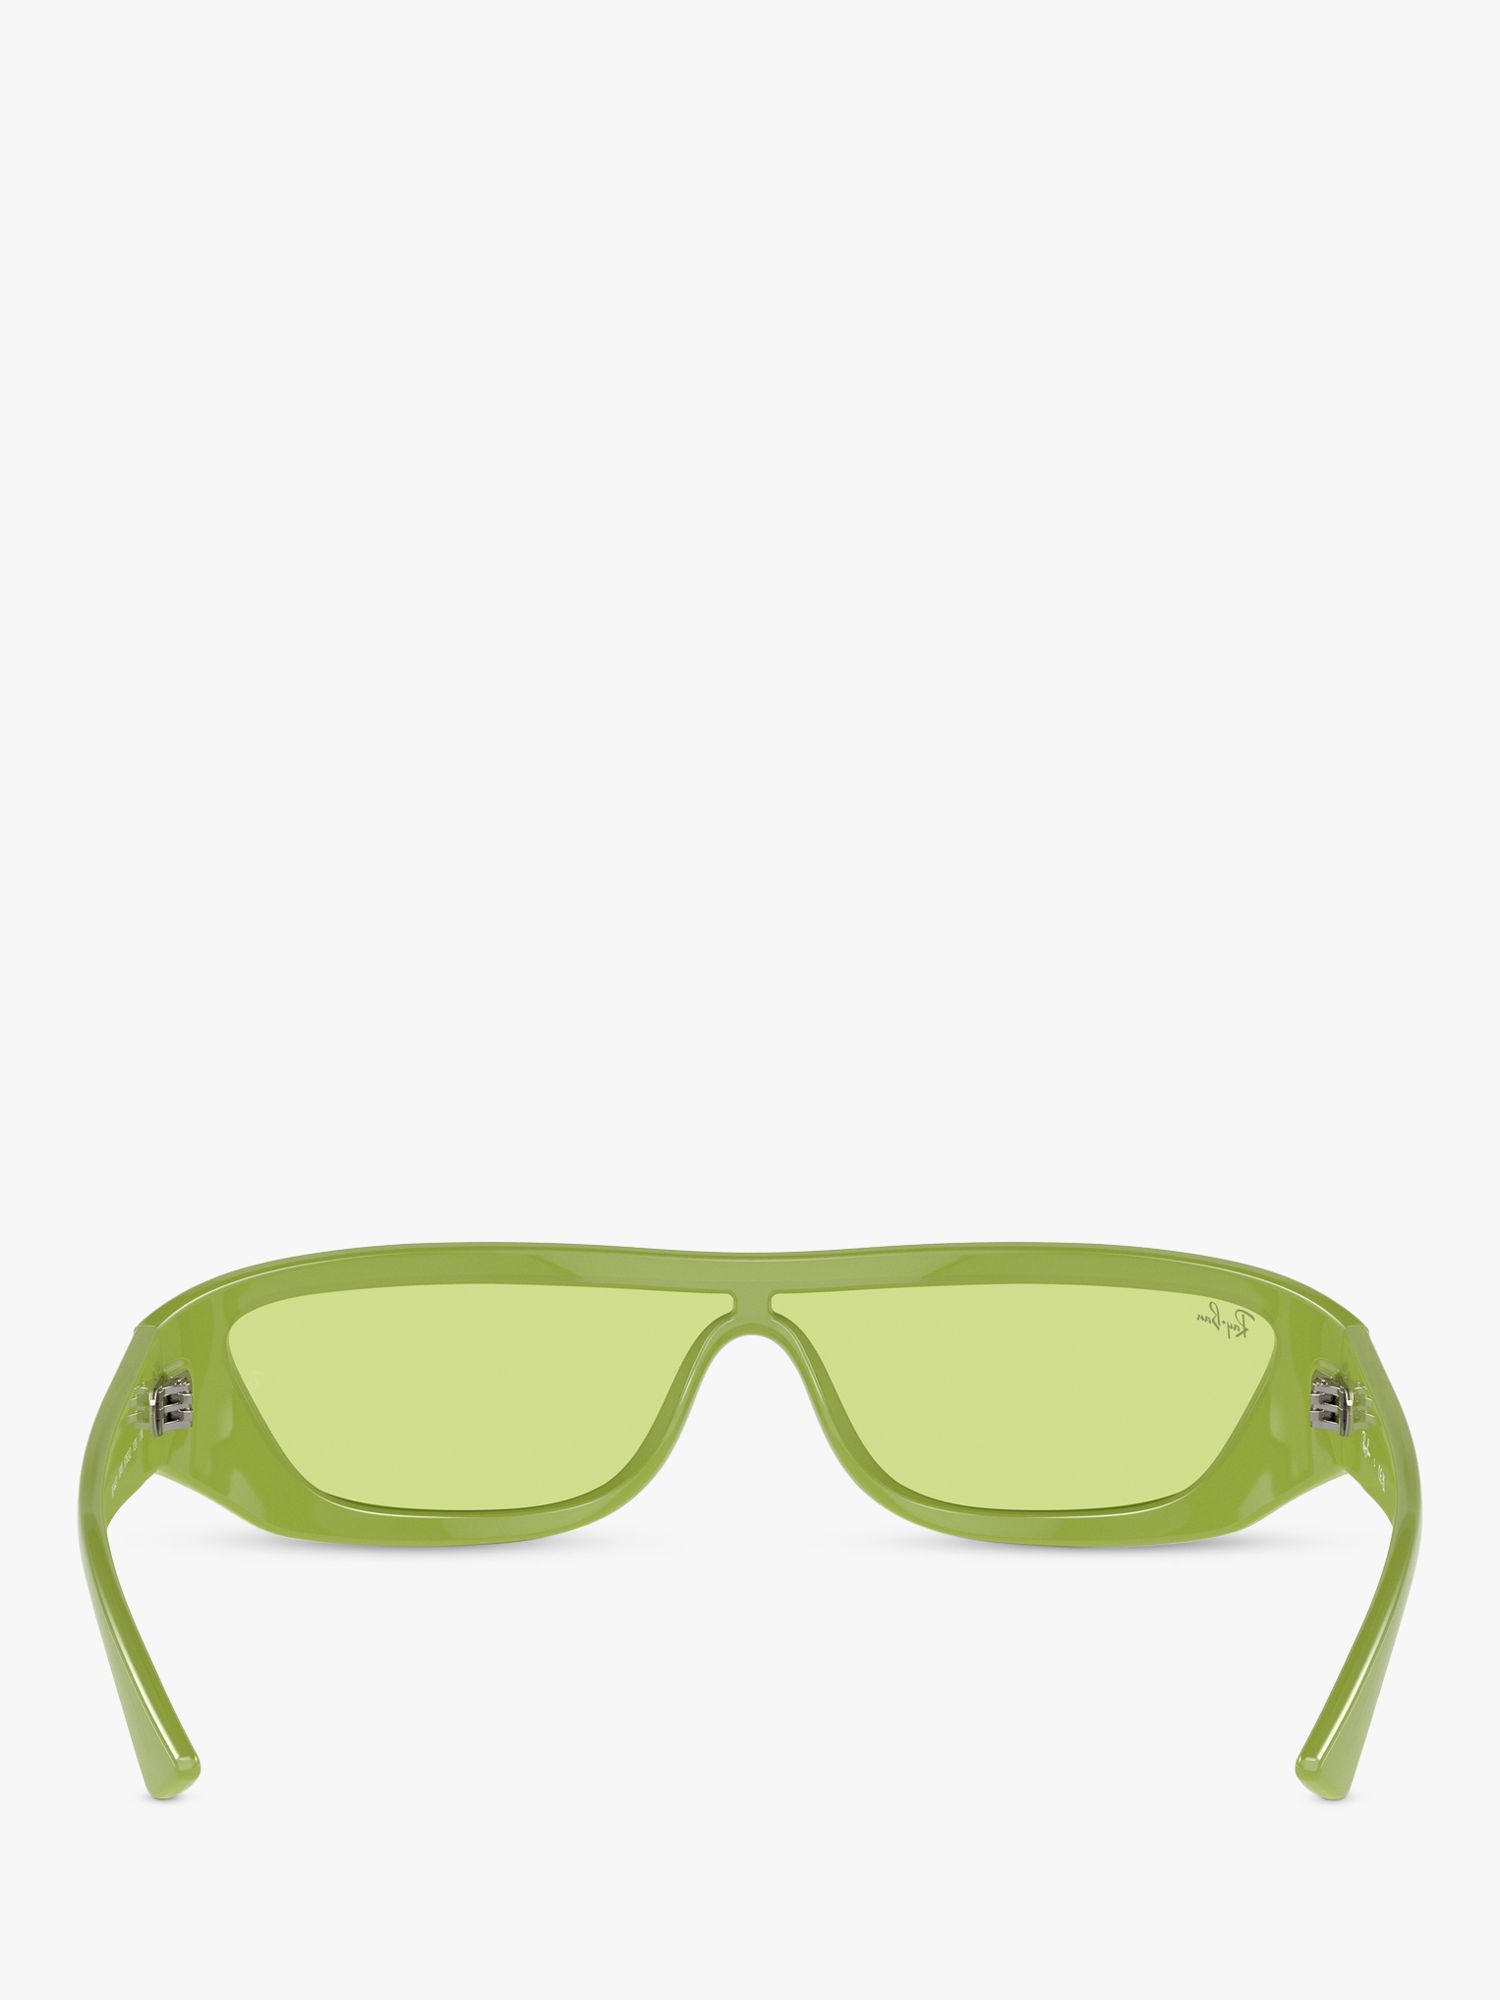 Buy Ray-Ban RB4431 Unisex Xan Wrap Sunglasses, Apple Green Online at johnlewis.com